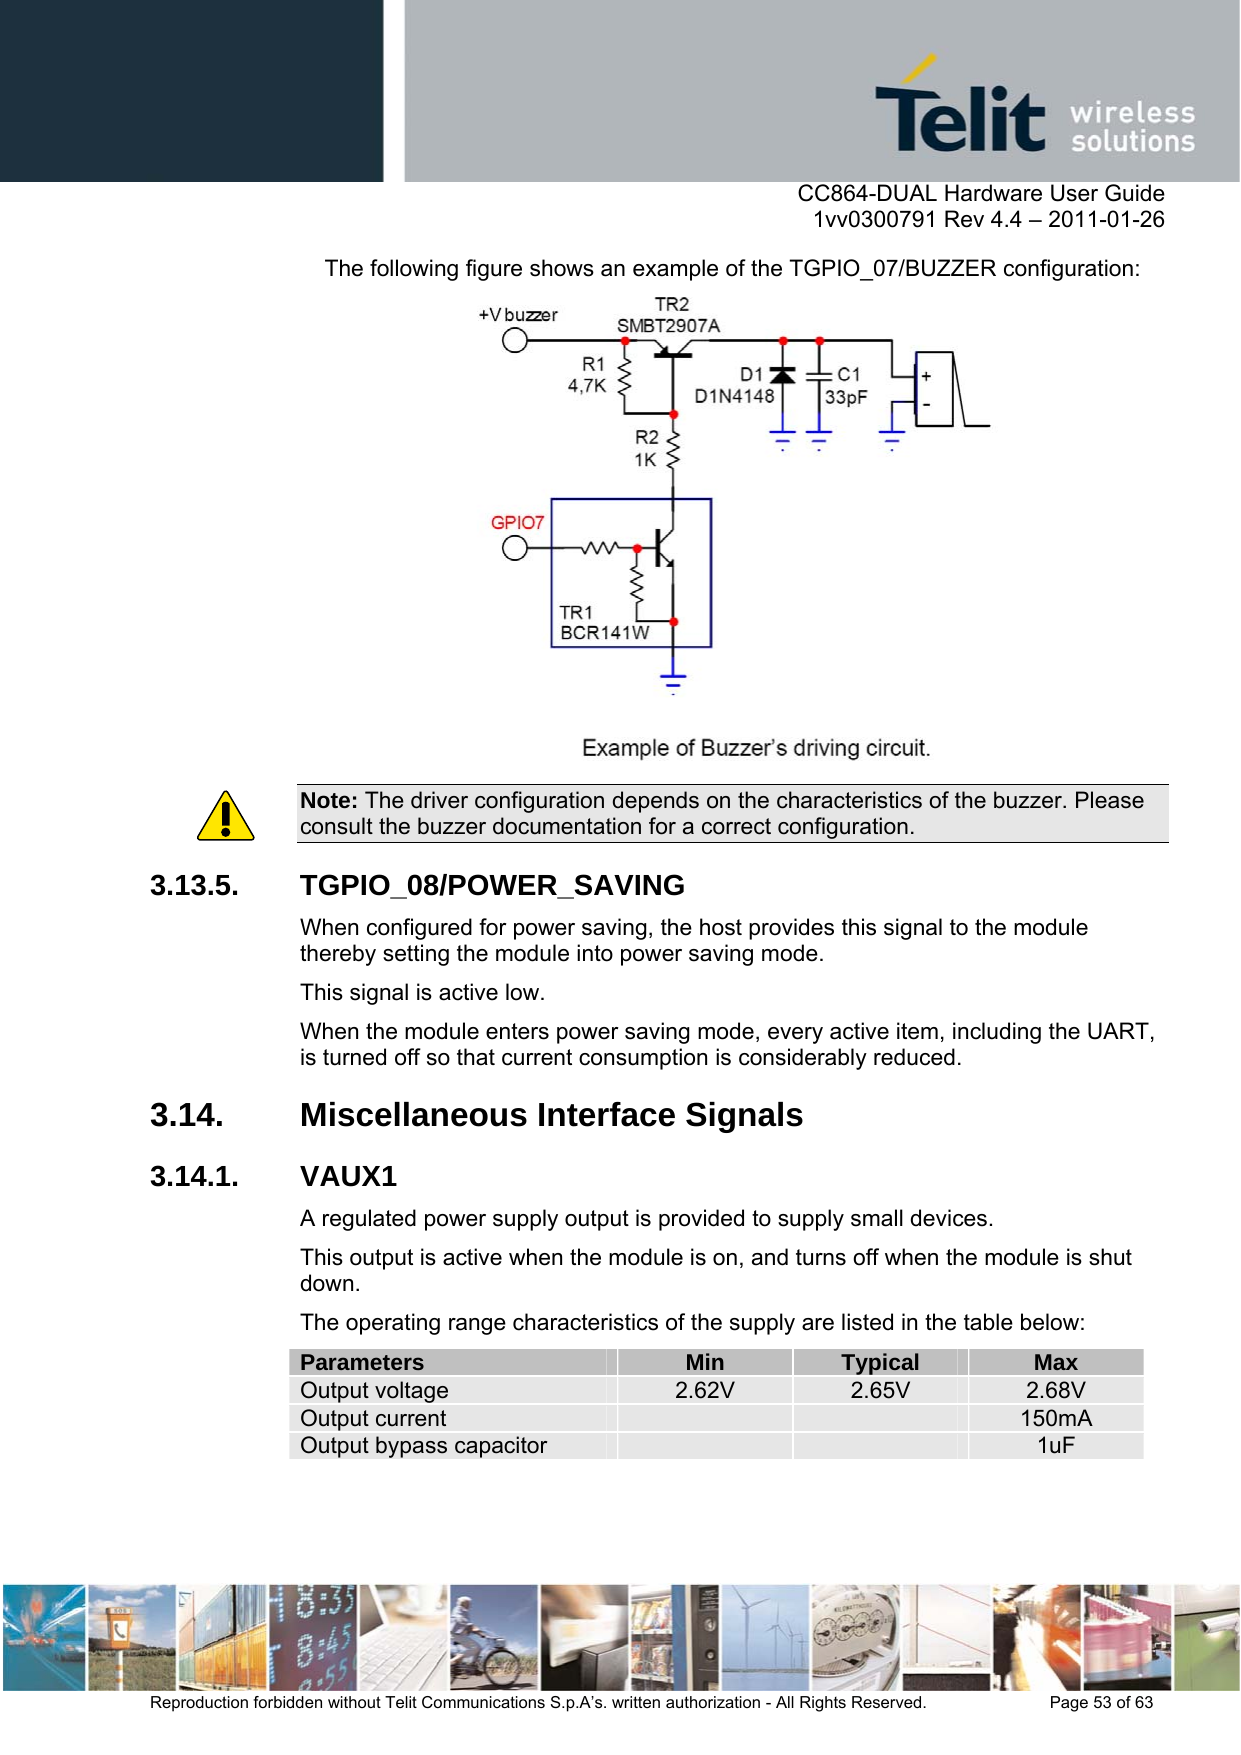      CC864-DUAL Hardware User Guide    1vv0300791 Rev 4.4 – 2011-01-26  Reproduction forbidden without Telit Communications S.p.A’s. written authorization - All Rights Reserved.    Page 53 of 63  The following figure shows an example of the TGPIO_07/BUZZER configuration:  Note: The driver configuration depends on the characteristics of the buzzer. Please consult the buzzer documentation for a correct configuration. 3.13.5. TGPIO_08/POWER_SAVING When configured for power saving, the host provides this signal to the module thereby setting the module into power saving mode.  This signal is active low. When the module enters power saving mode, every active item, including the UART, is turned off so that current consumption is considerably reduced.   3.14. Miscellaneous Interface Signals 3.14.1. VAUX1 A regulated power supply output is provided to supply small devices. This output is active when the module is on, and turns off when the module is shut down.  The operating range characteristics of the supply are listed in the table below: Parameters  Min  Typical  Max Output voltage  2.62V  2.65V  2.68V Output current      150mA Output bypass capacitor      1uF  